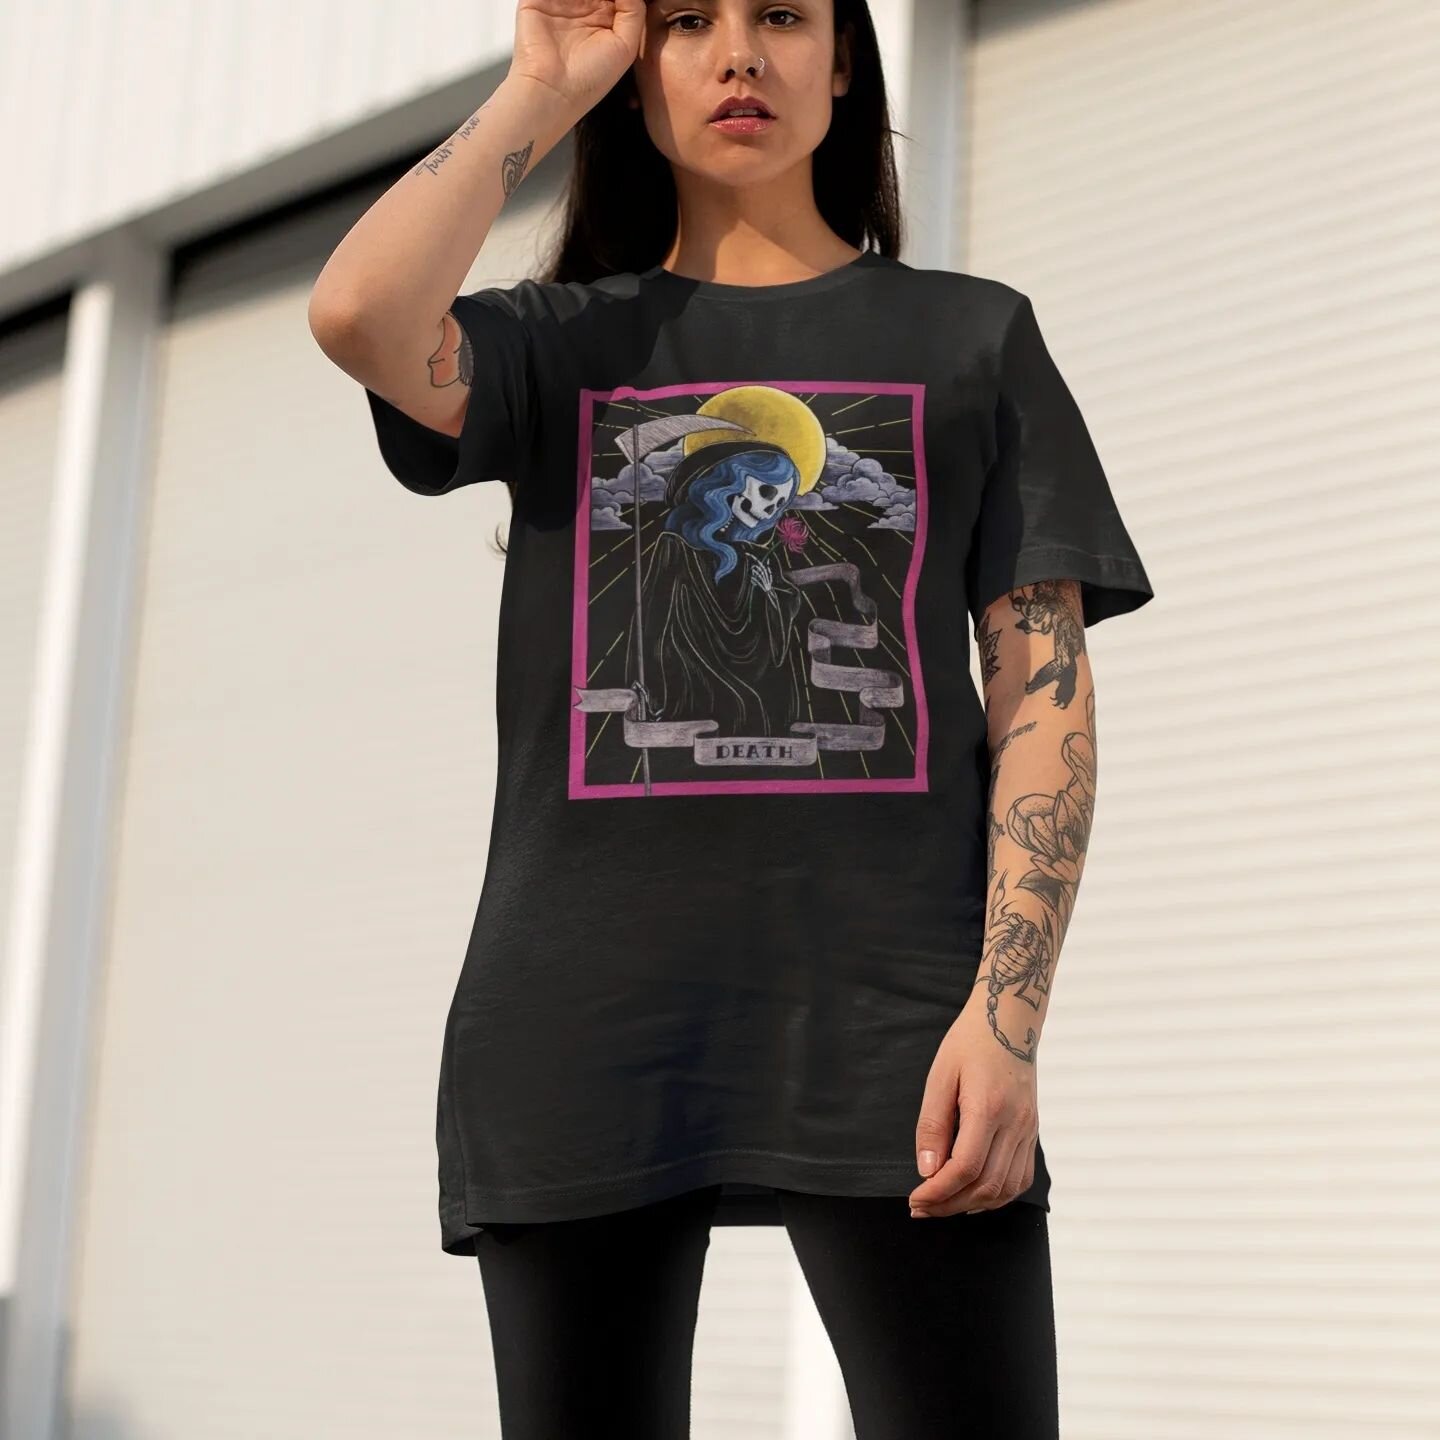 New shirts just dropped in my E t s y  S h o p!
The death tarot is a softstyle unisex tee available in sizes XS to 4XL. 
Oh and there may be a Valentine's S A L E happening at this very moment. 😘🥰🖤. 
.
.
.
#gothshirts #tarot #sizeinclusive #paynte